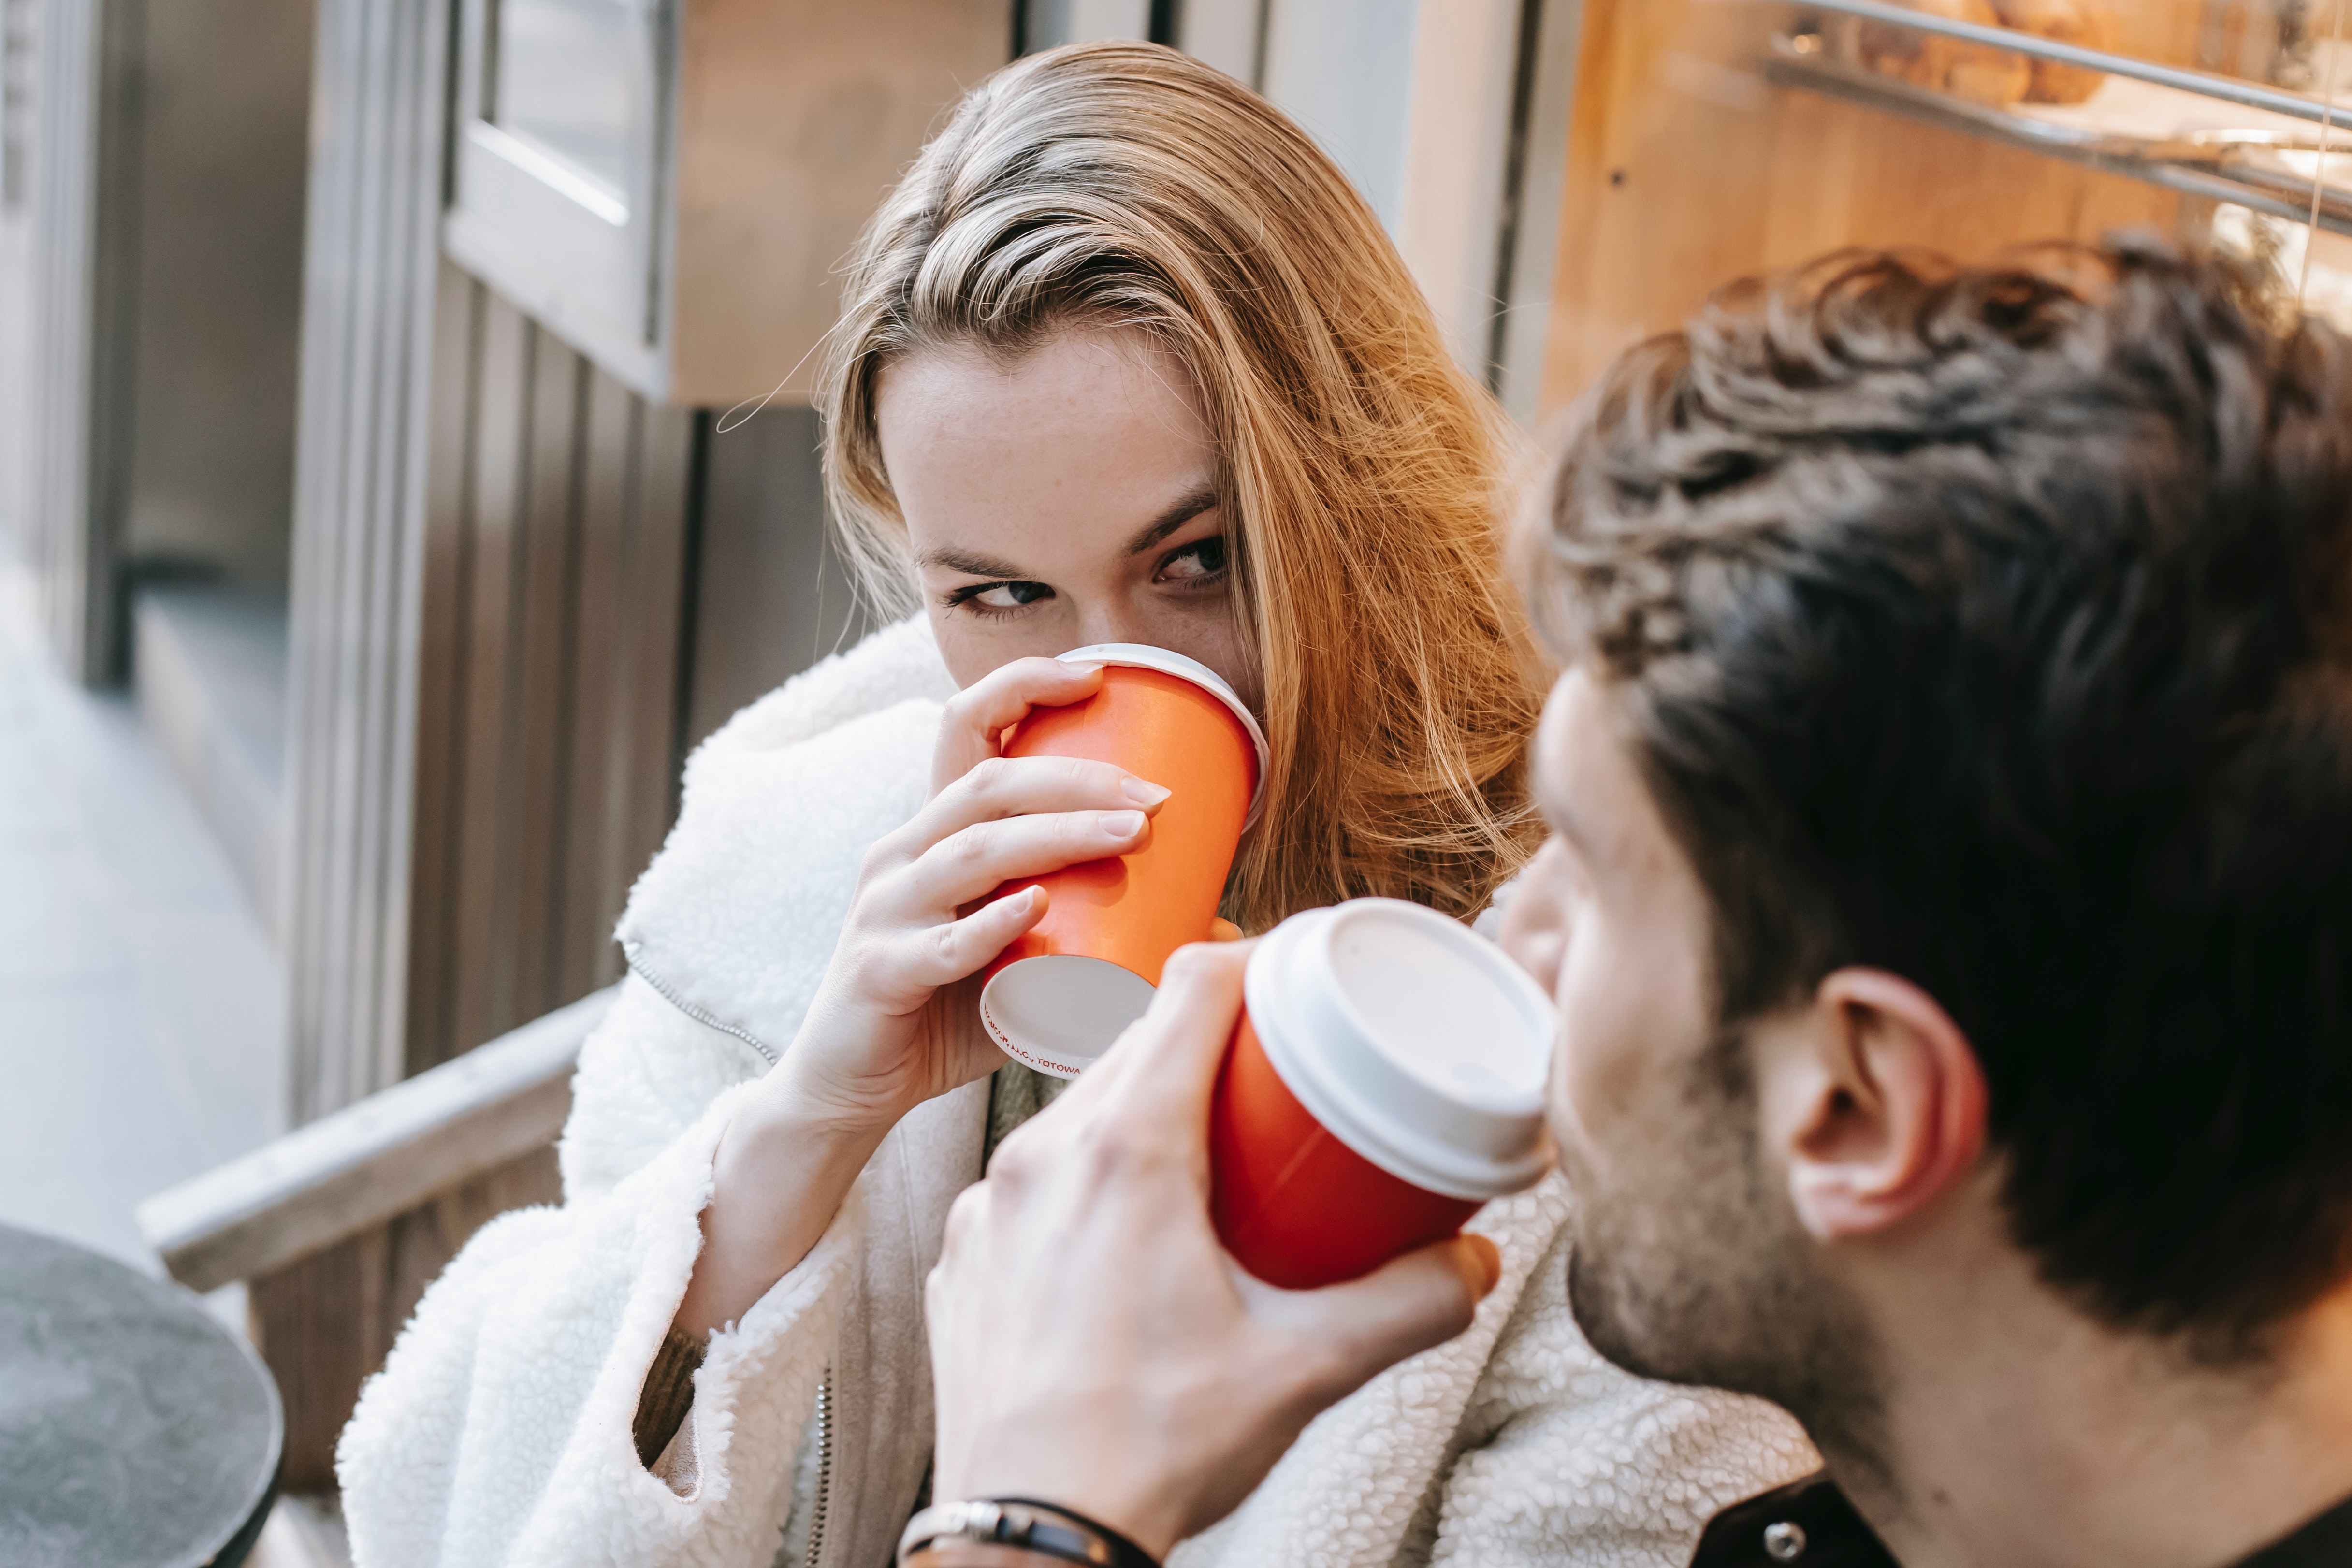 Two individuals drinking coffee together. | Source: Pexels